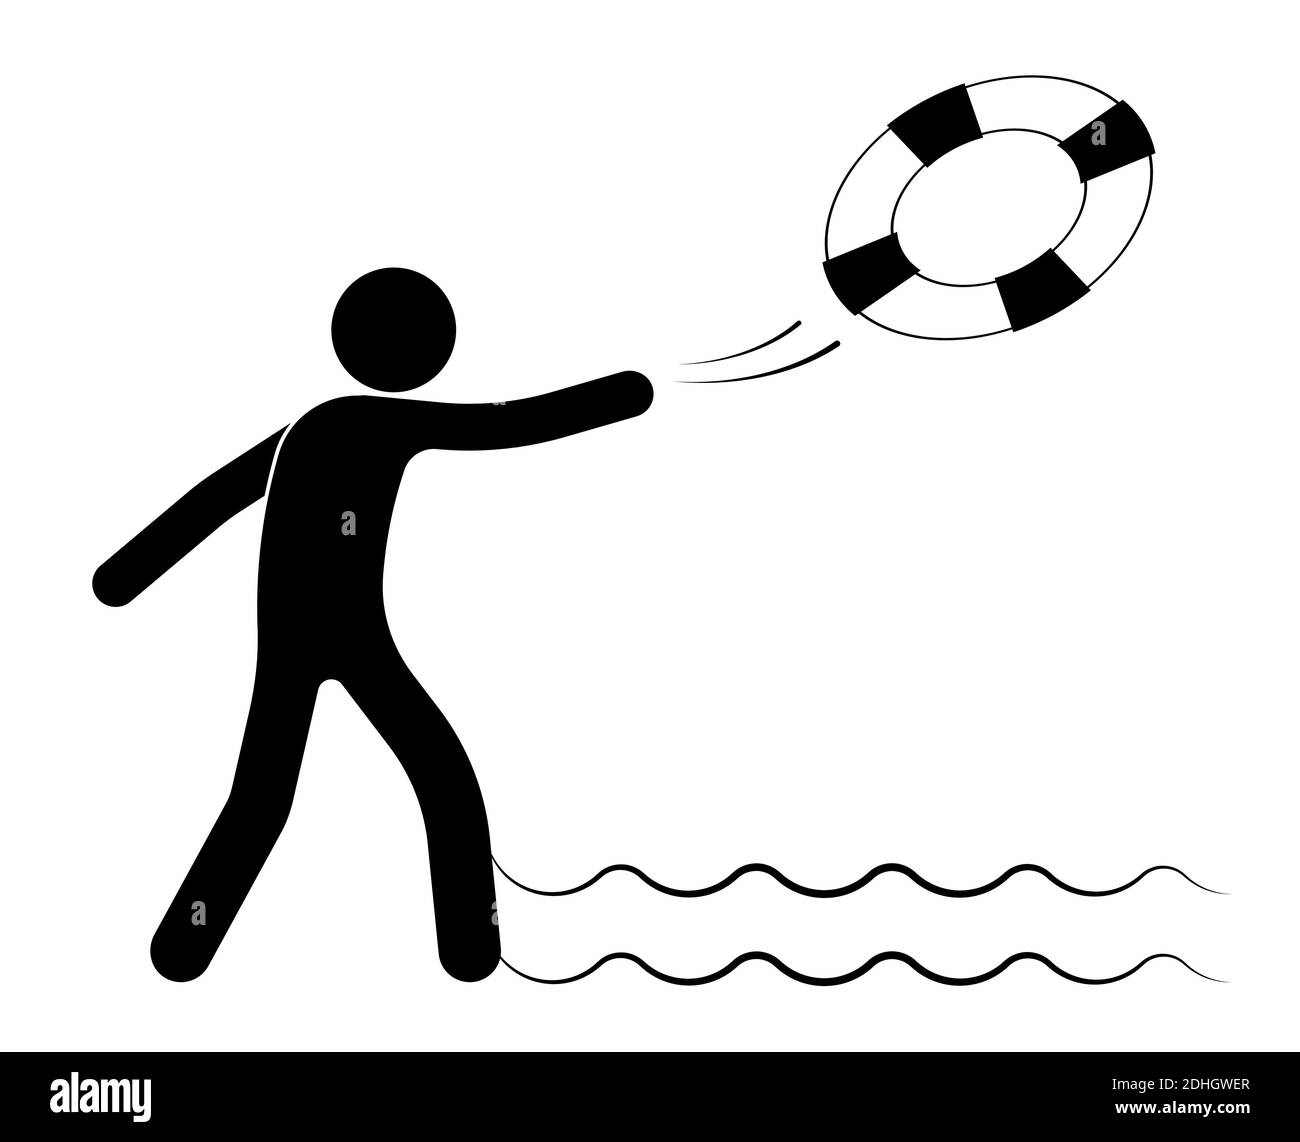 stick figure, man throws a life buoy into the sea from the shore. Assisting drowning people. Dangers of relaxing on the water. Isolated vector on whit Stock Vector